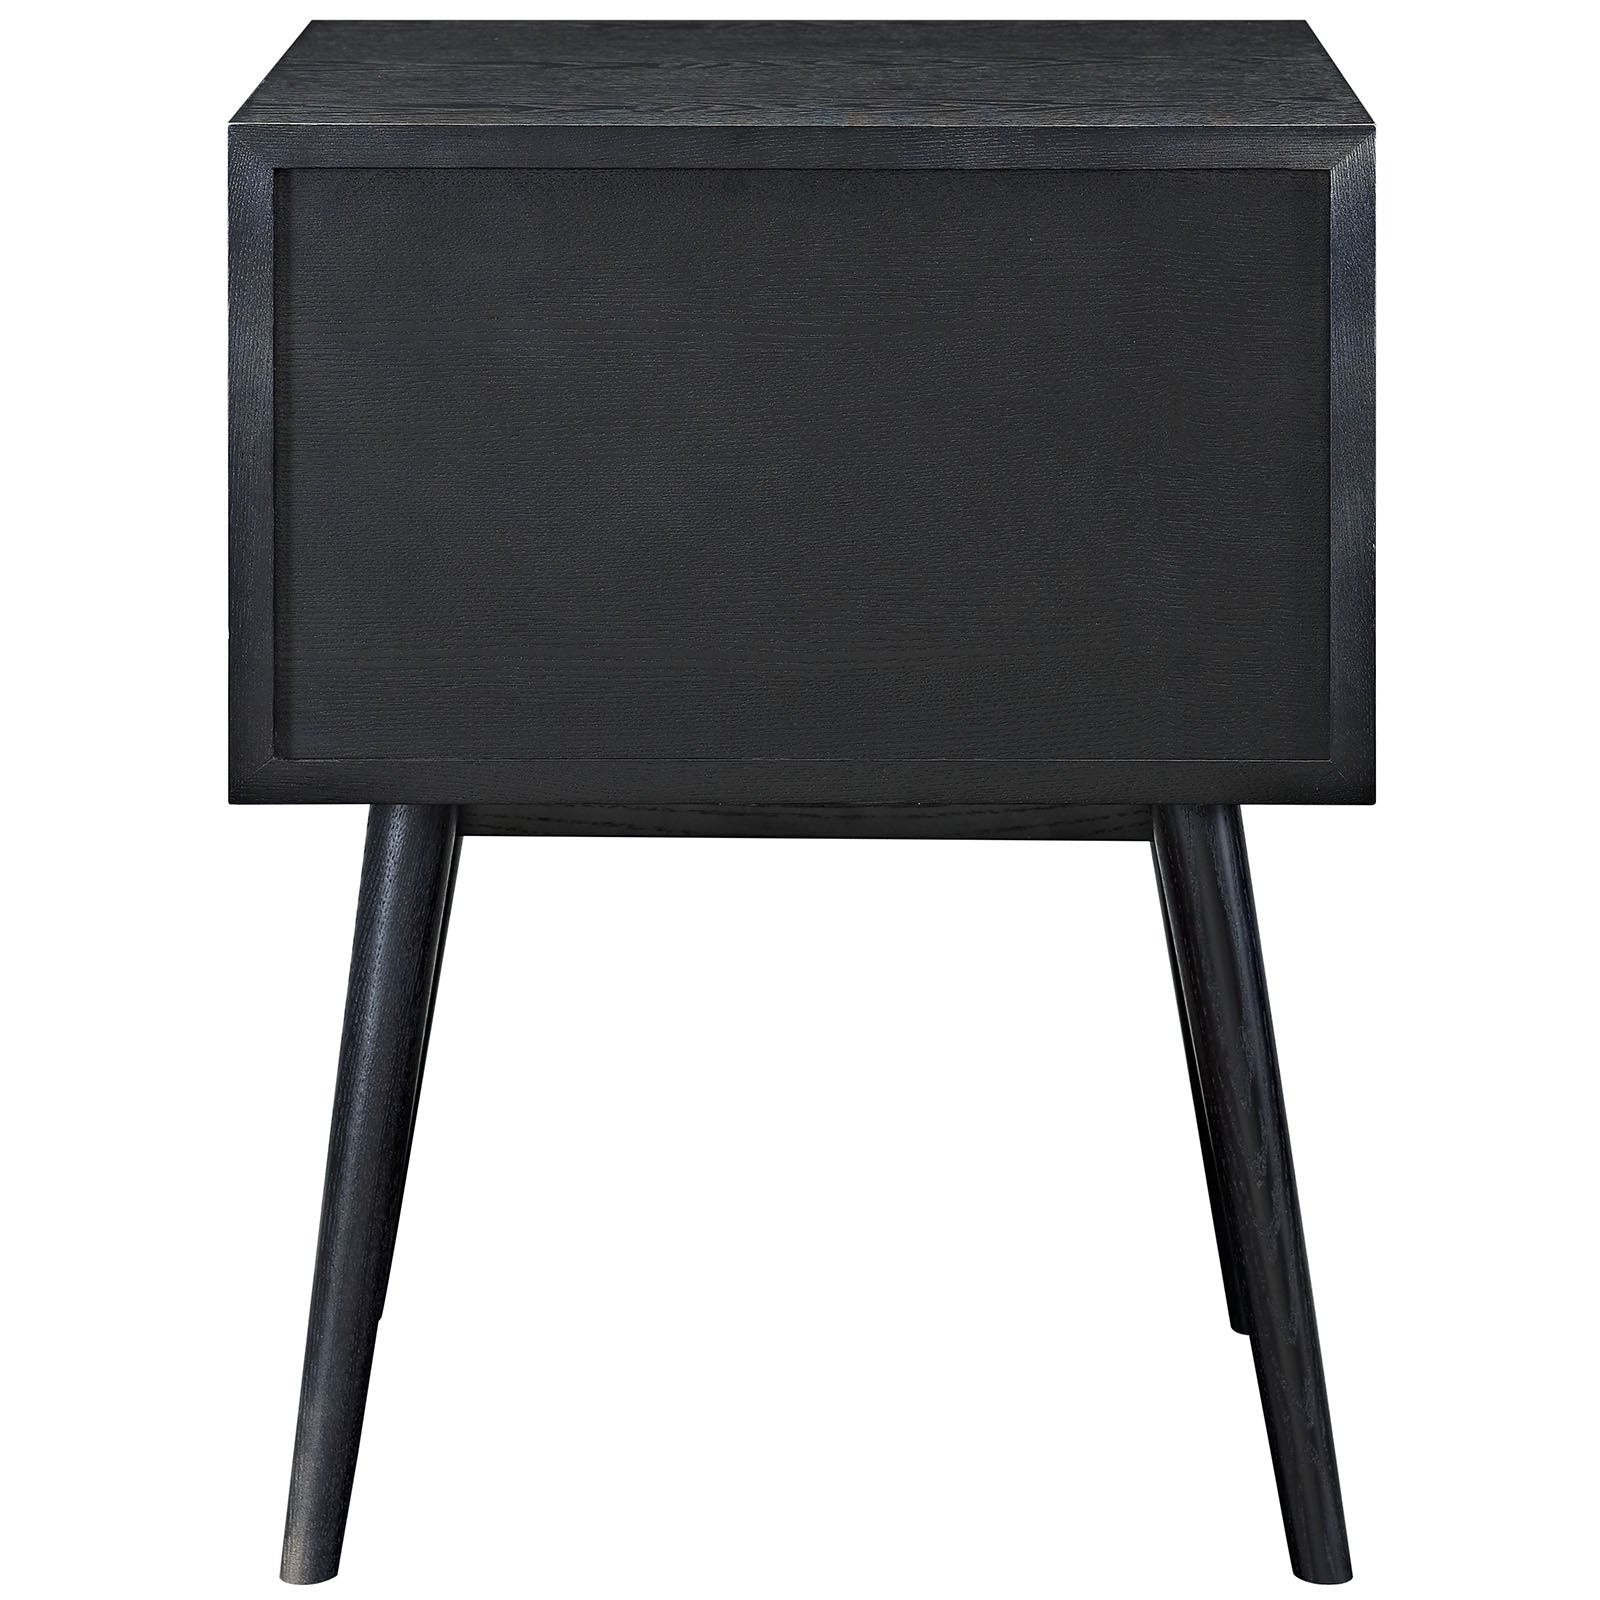 Modway Nightstands & Side Tables - Dispatch Nightstand Black